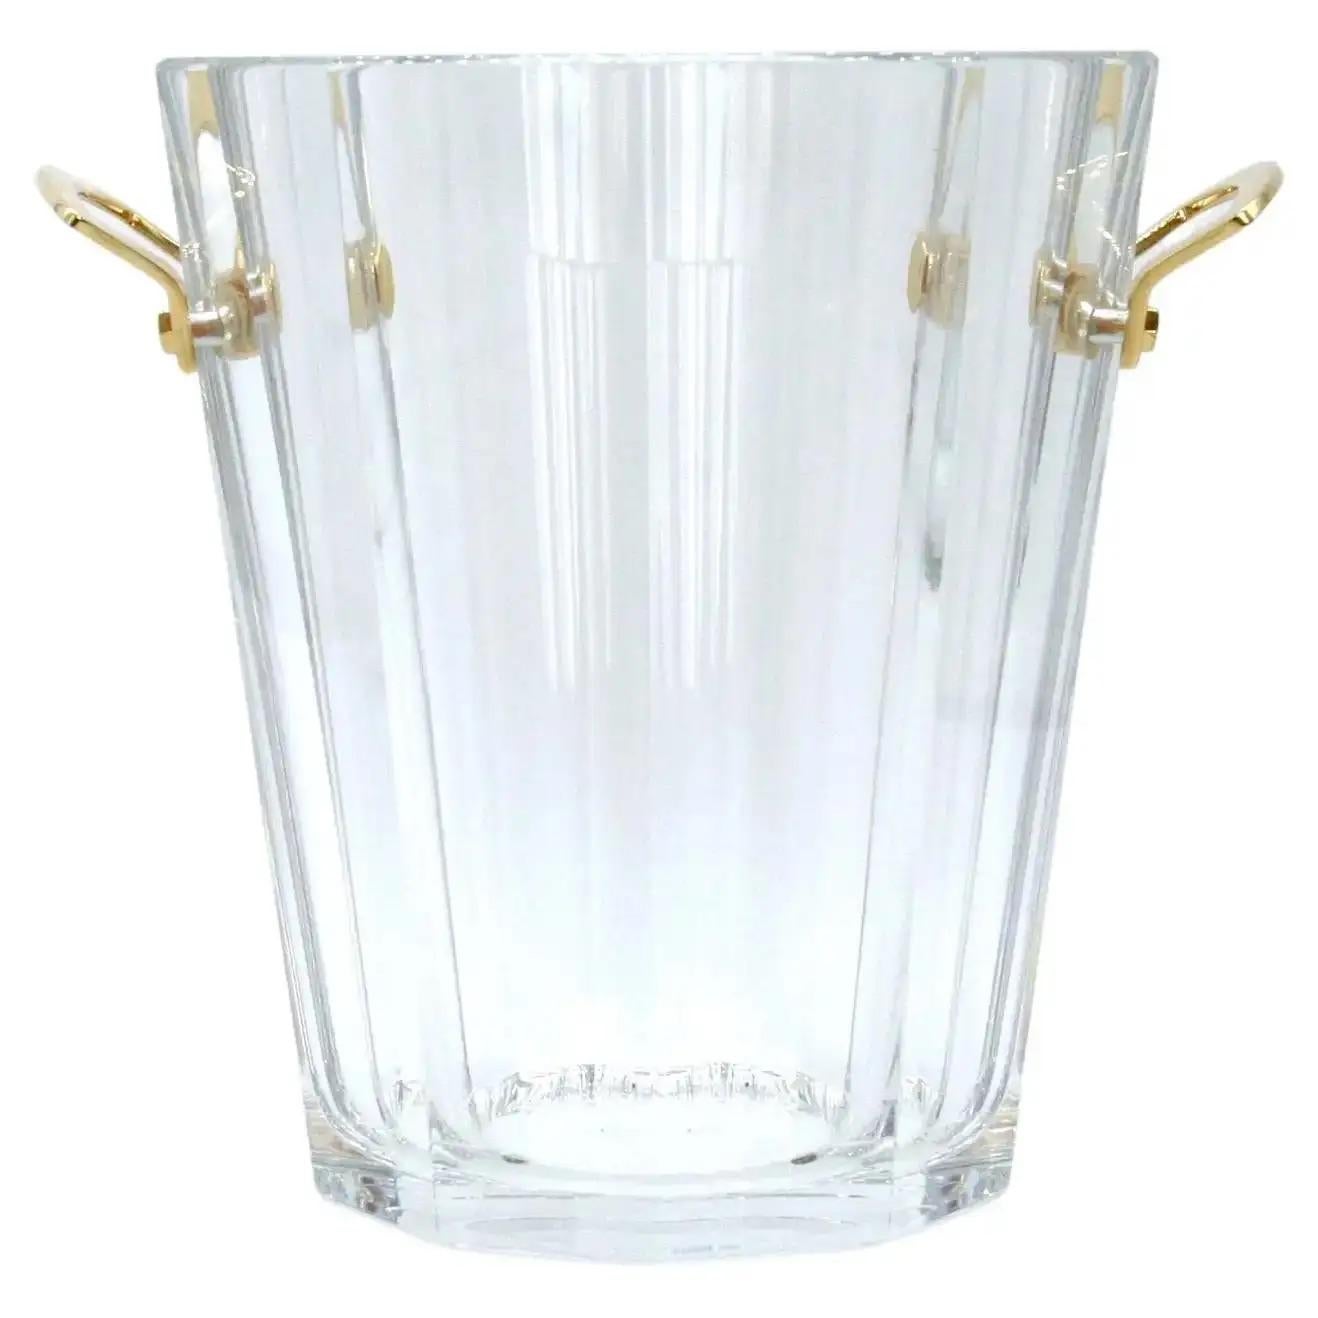 Beautifully hand crafted baccarat crystal barware / tableware champagne bucket or wine cooler with gilt bronze side handles. The cooler is in excellent condition. Maker's mark etched underneath. Minor wear. The bucket / cooler stands about 10 inches